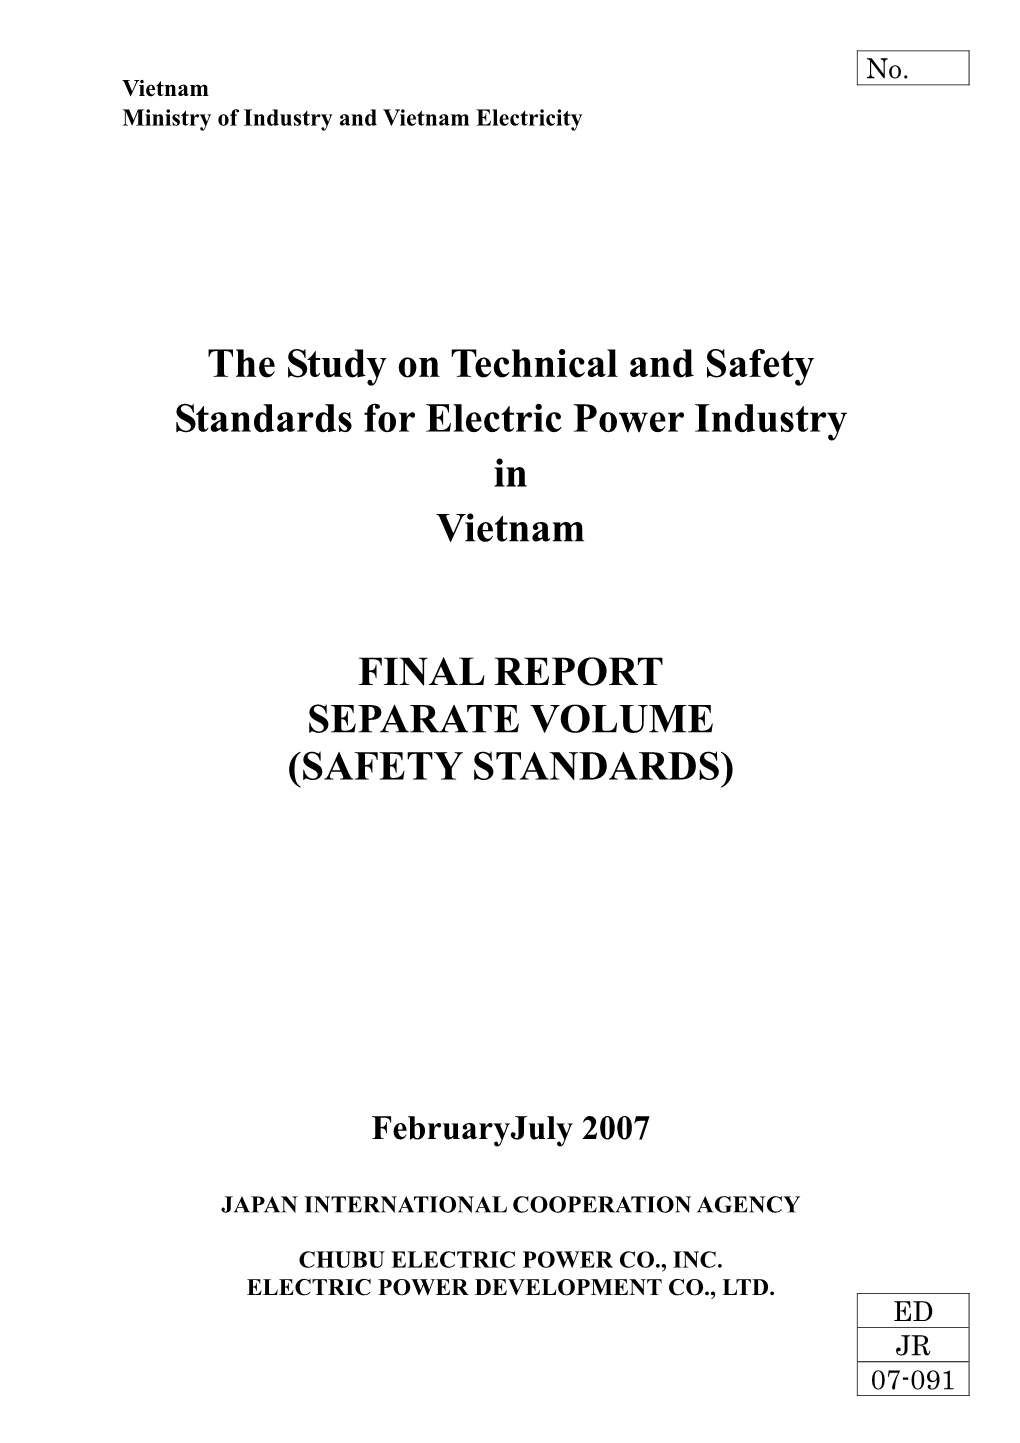 The Study on Technical and Safety Standards for Electric Power Industry in Vietnam